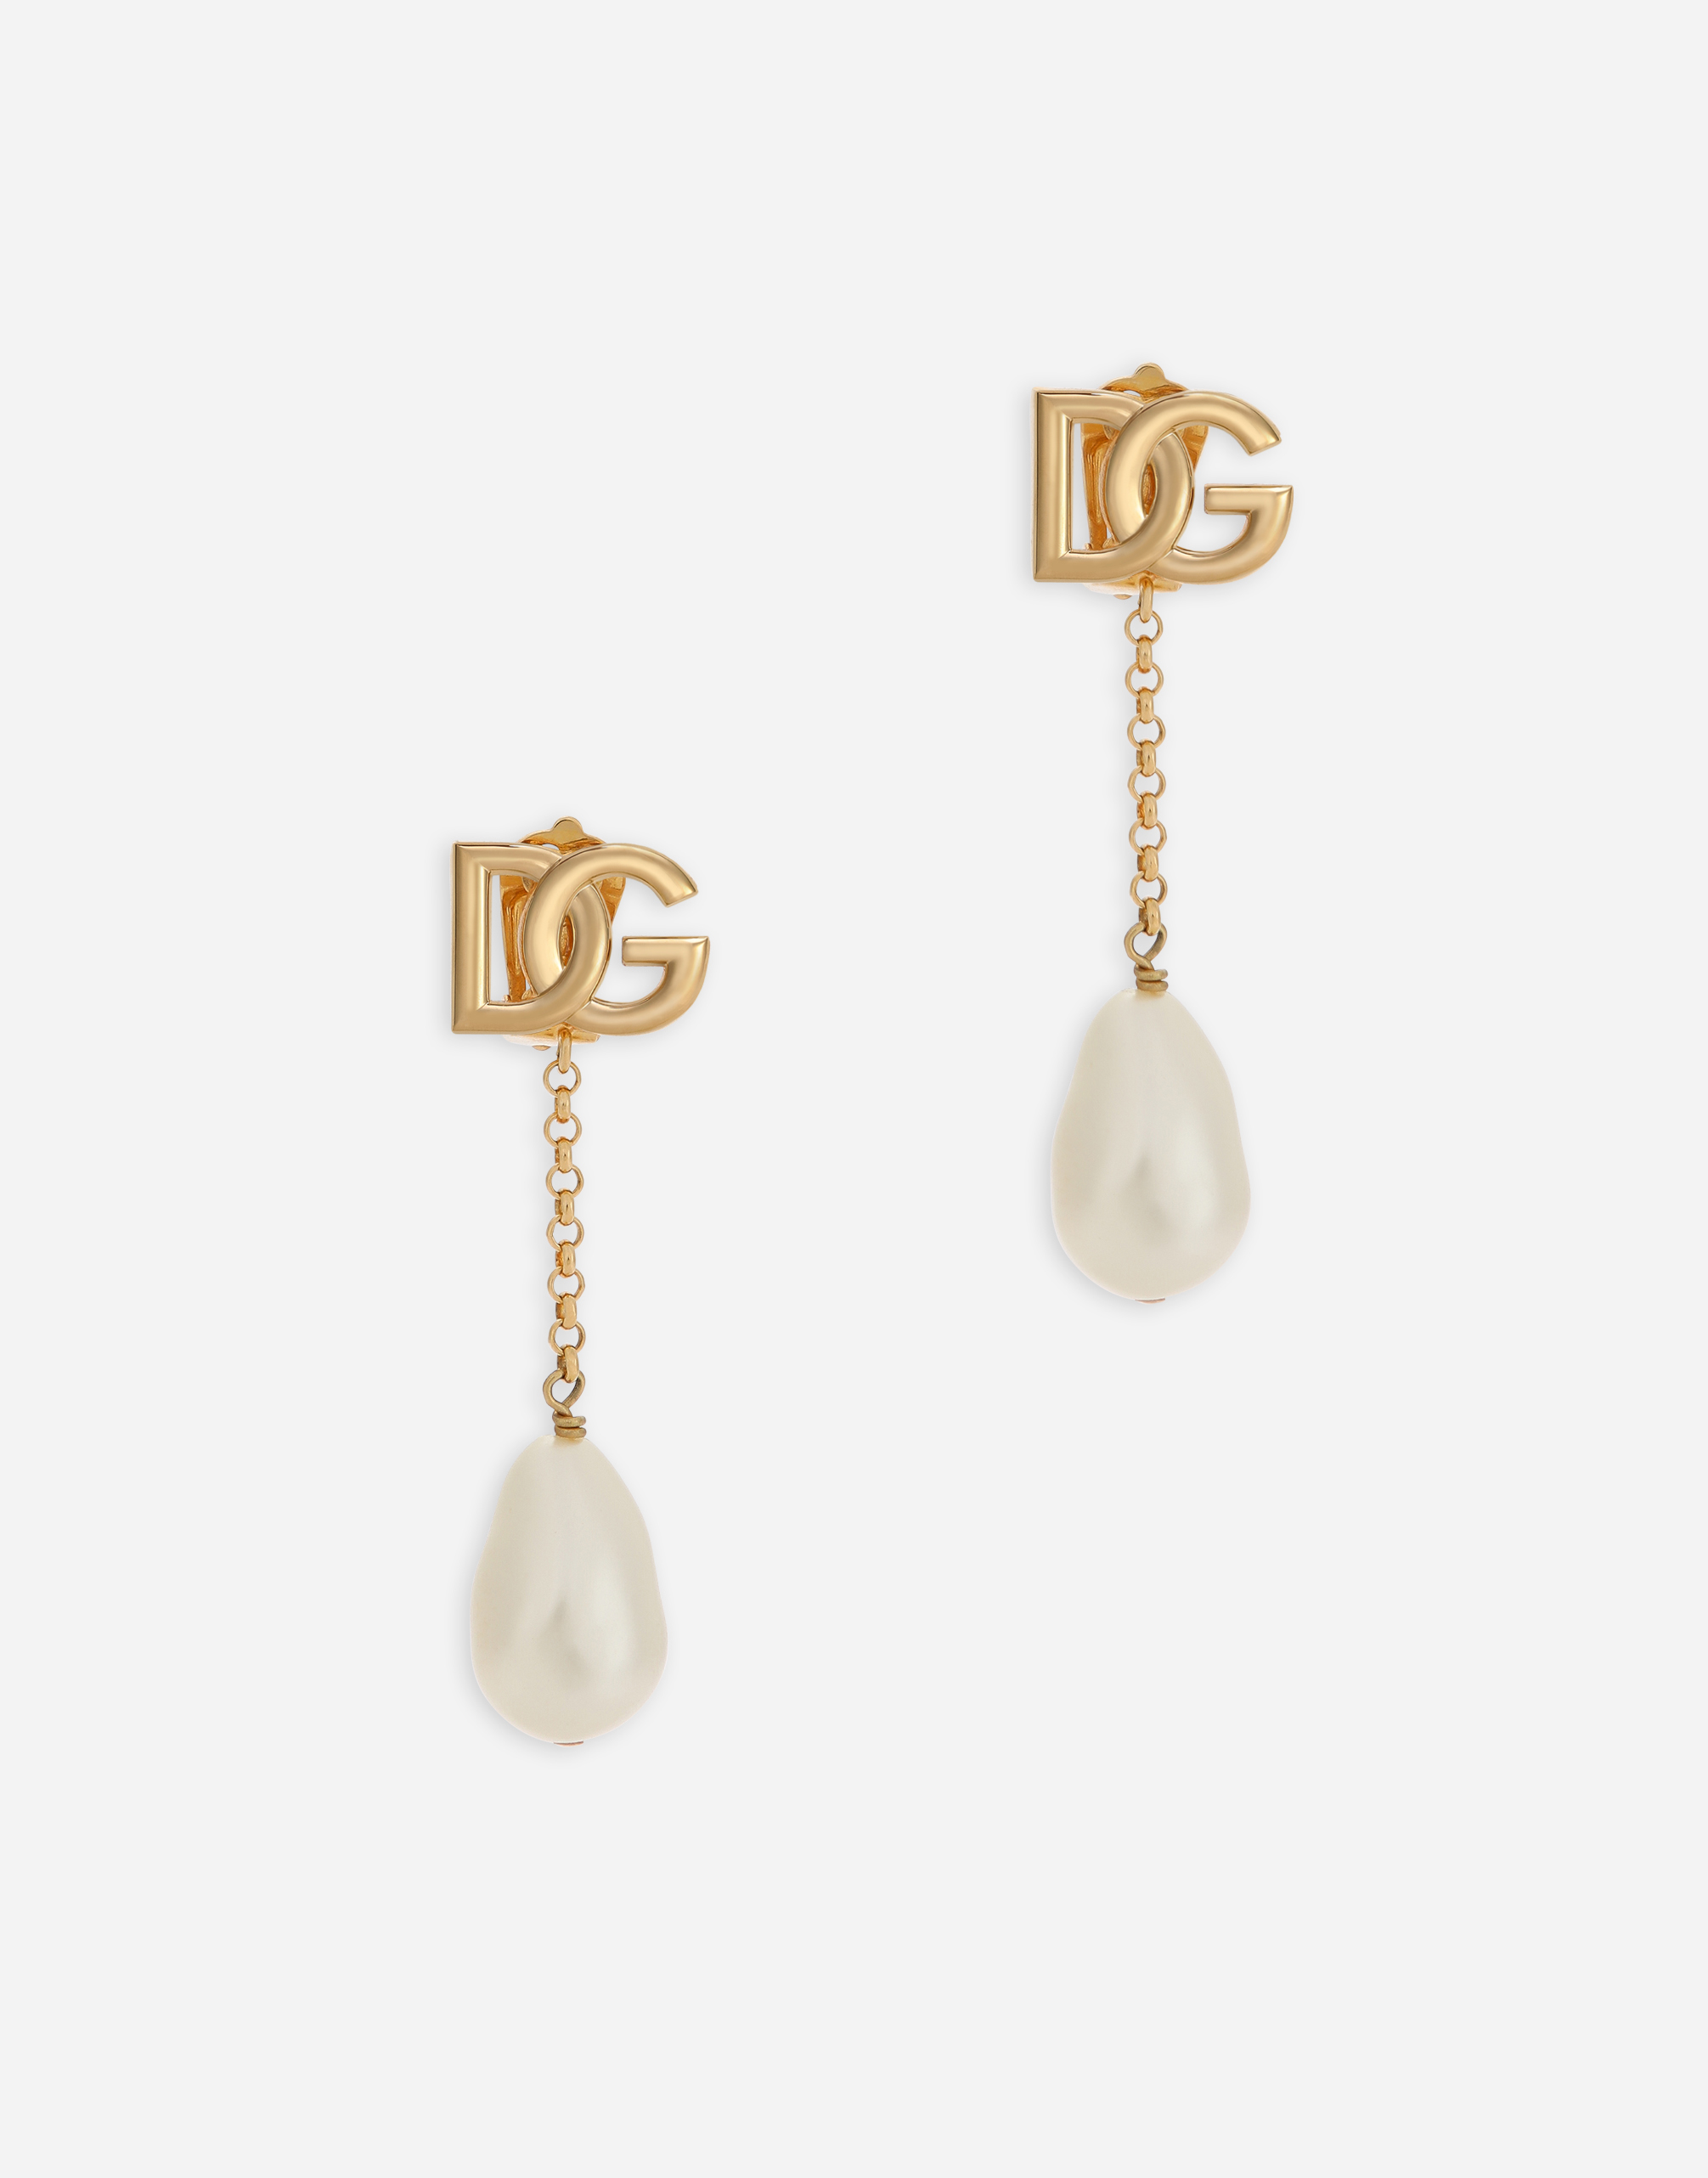 Drop earrings with pearls and DG logo in Gold